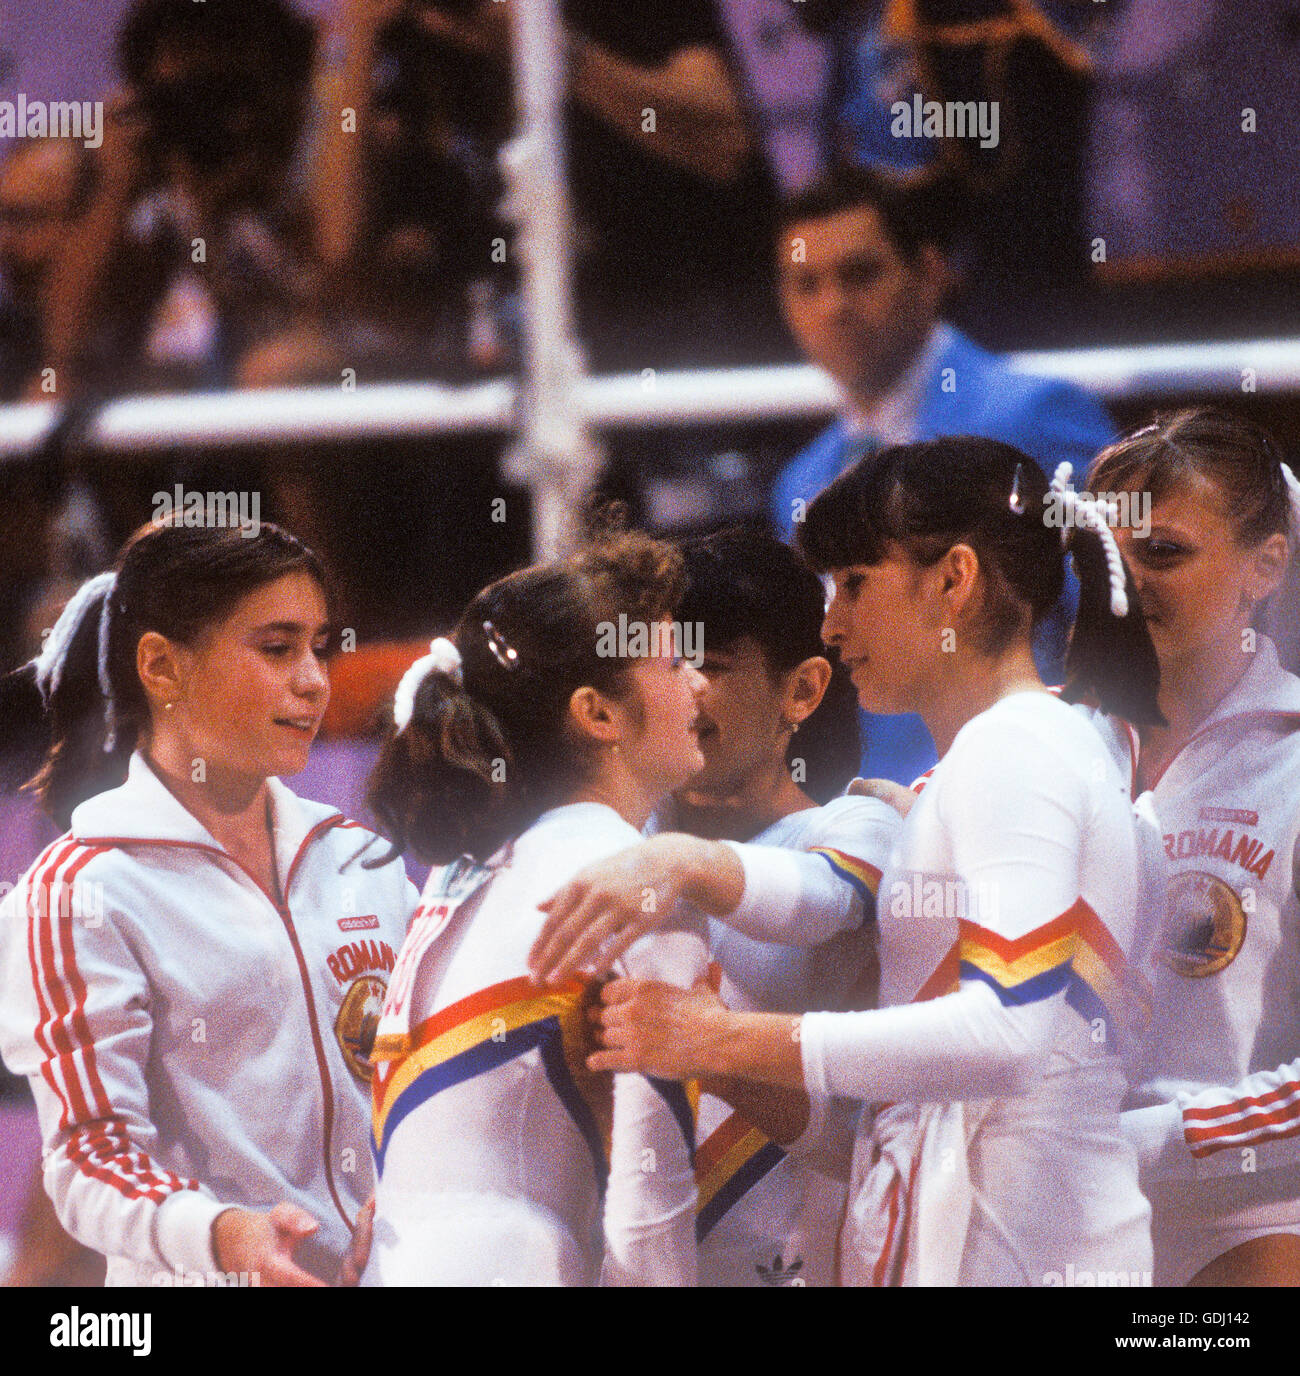 Romanian Gymnastics Team gather for congratulations after competition at 1984 Olympic Games in Los Angeles. Stock Photo